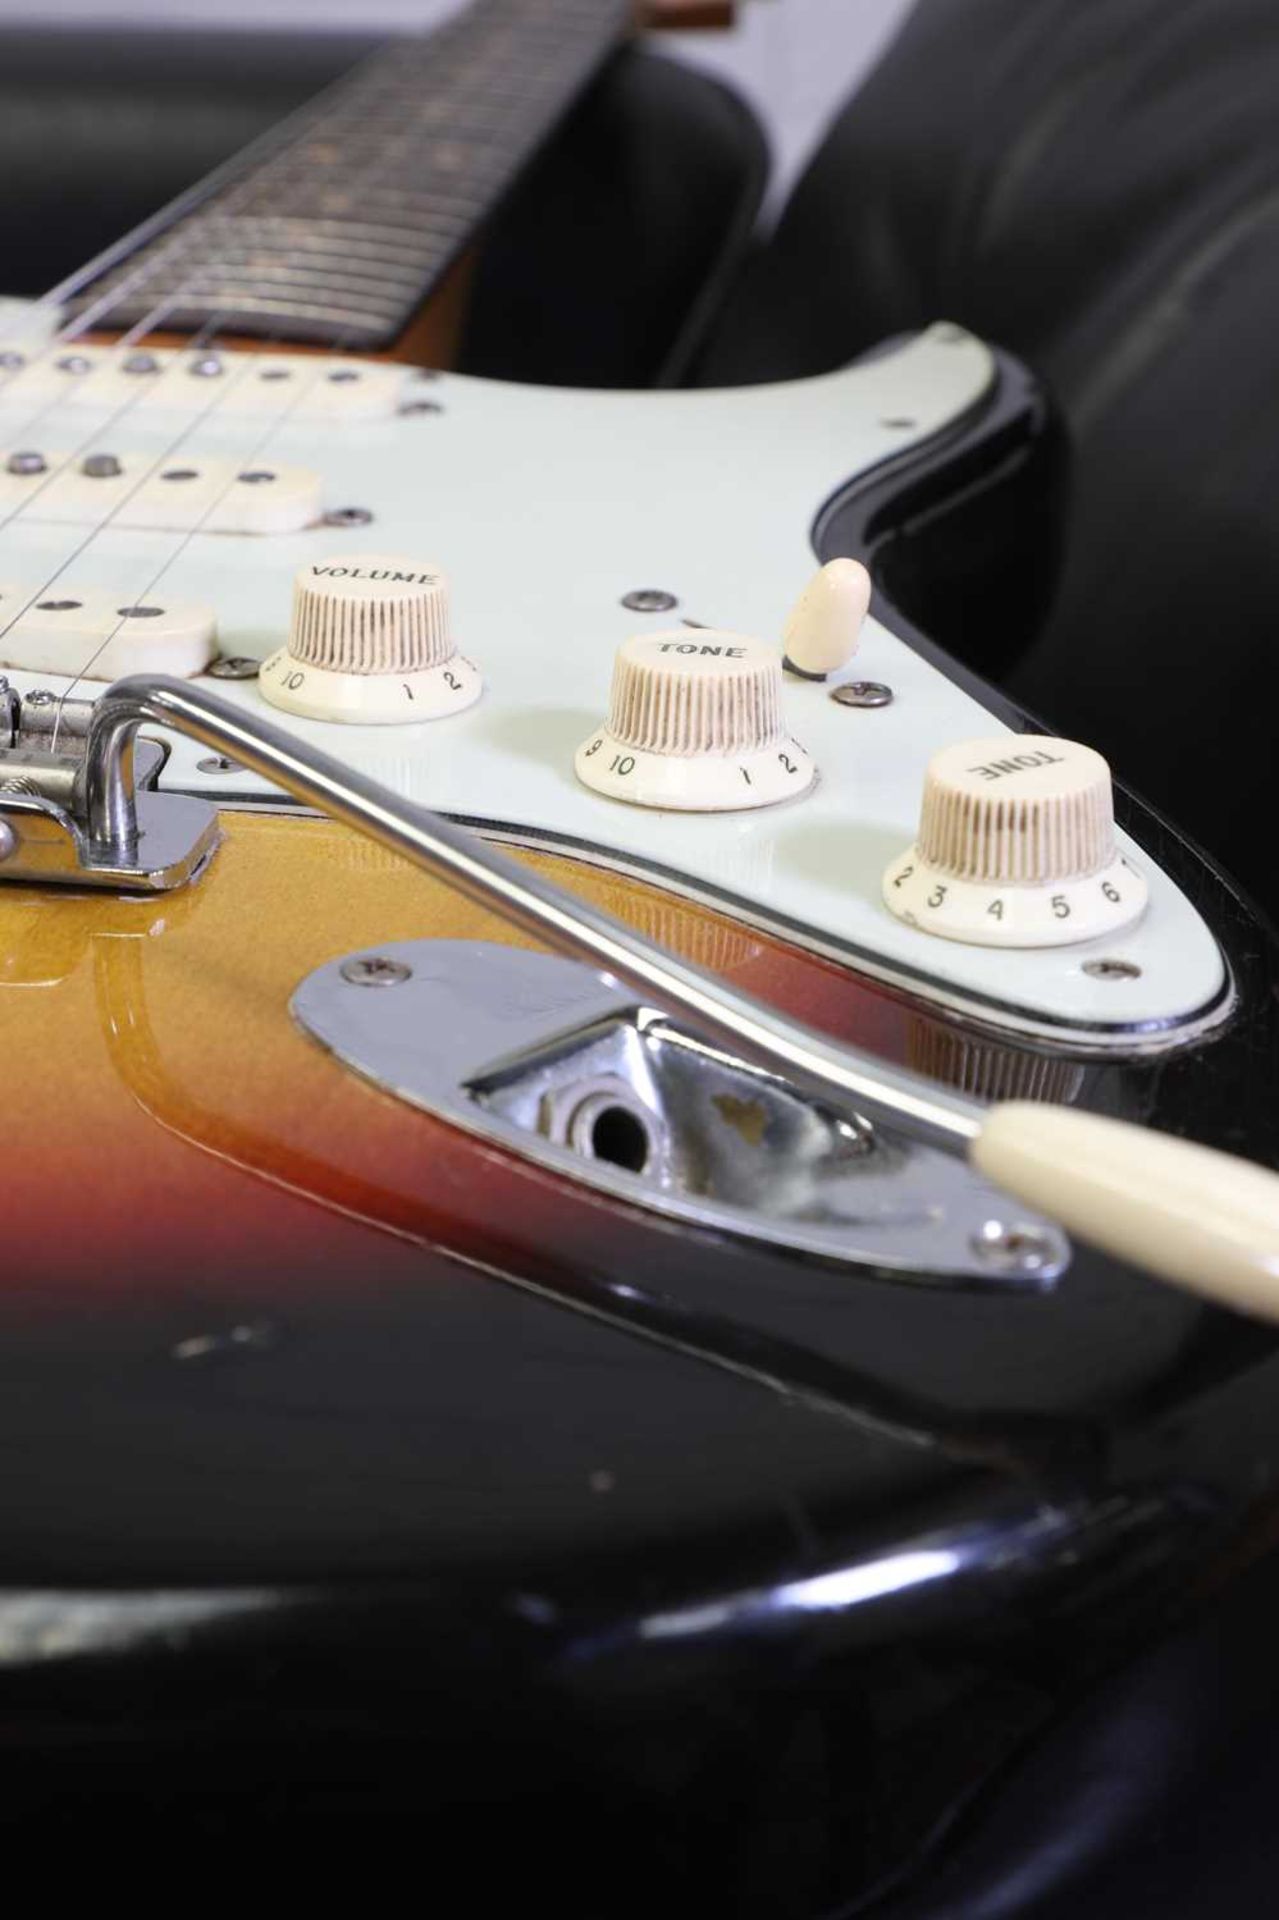 A 1963 Fender Stratocaster electric guitar, - Image 7 of 32